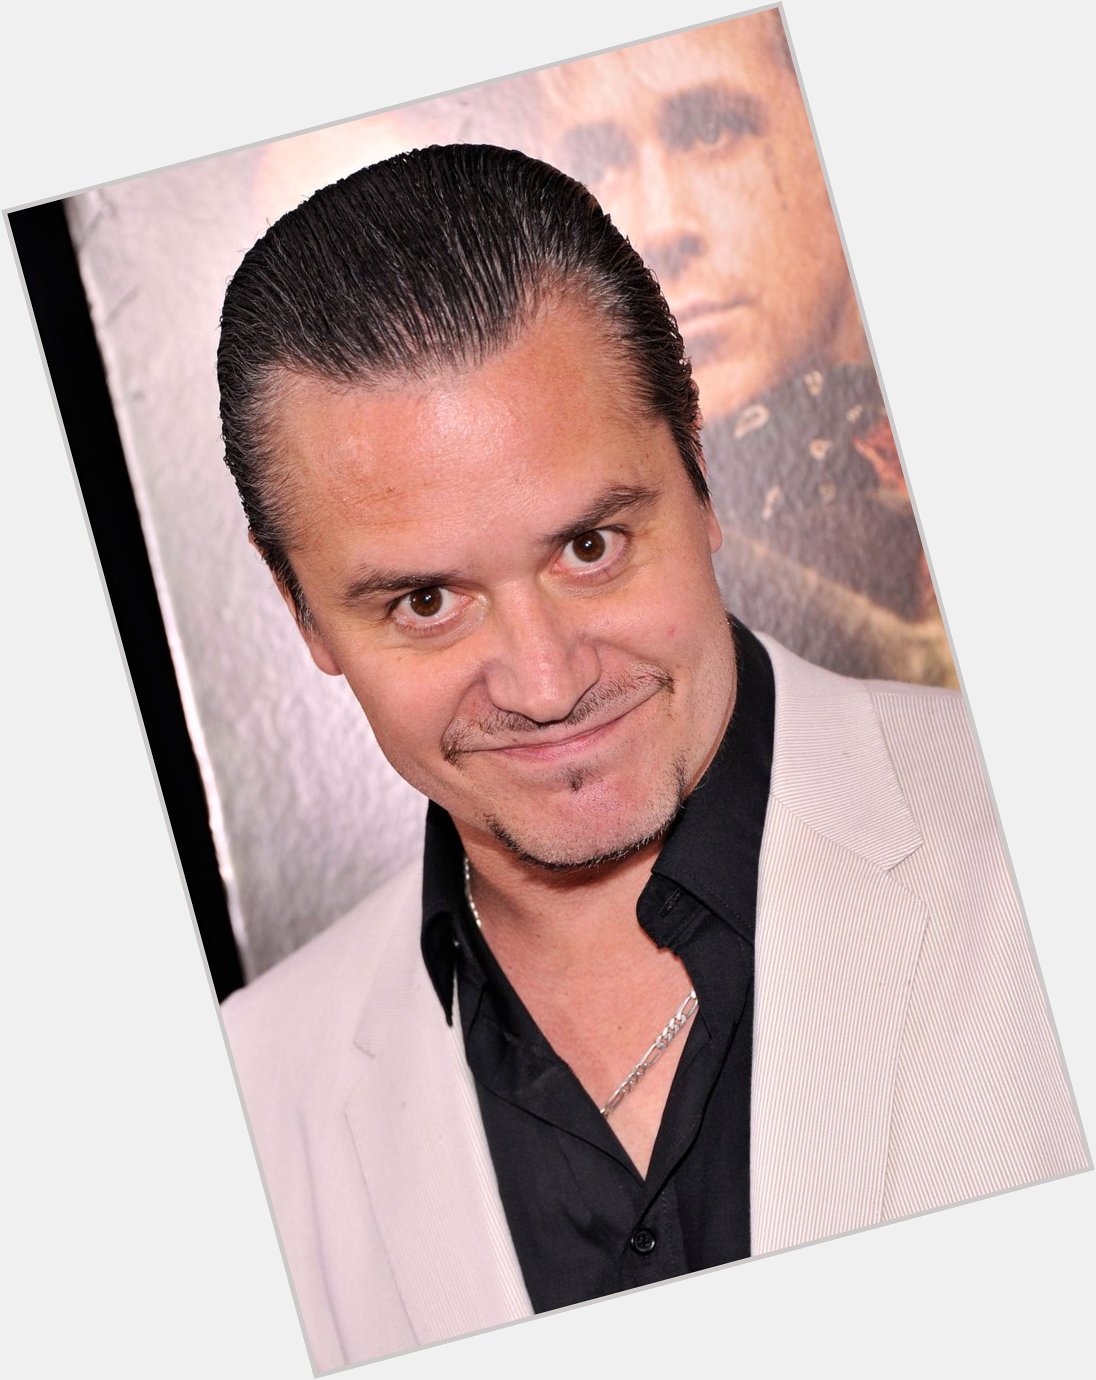 Happy birthday to my favorite person who provided voice rolls in i am legend
mike patton 